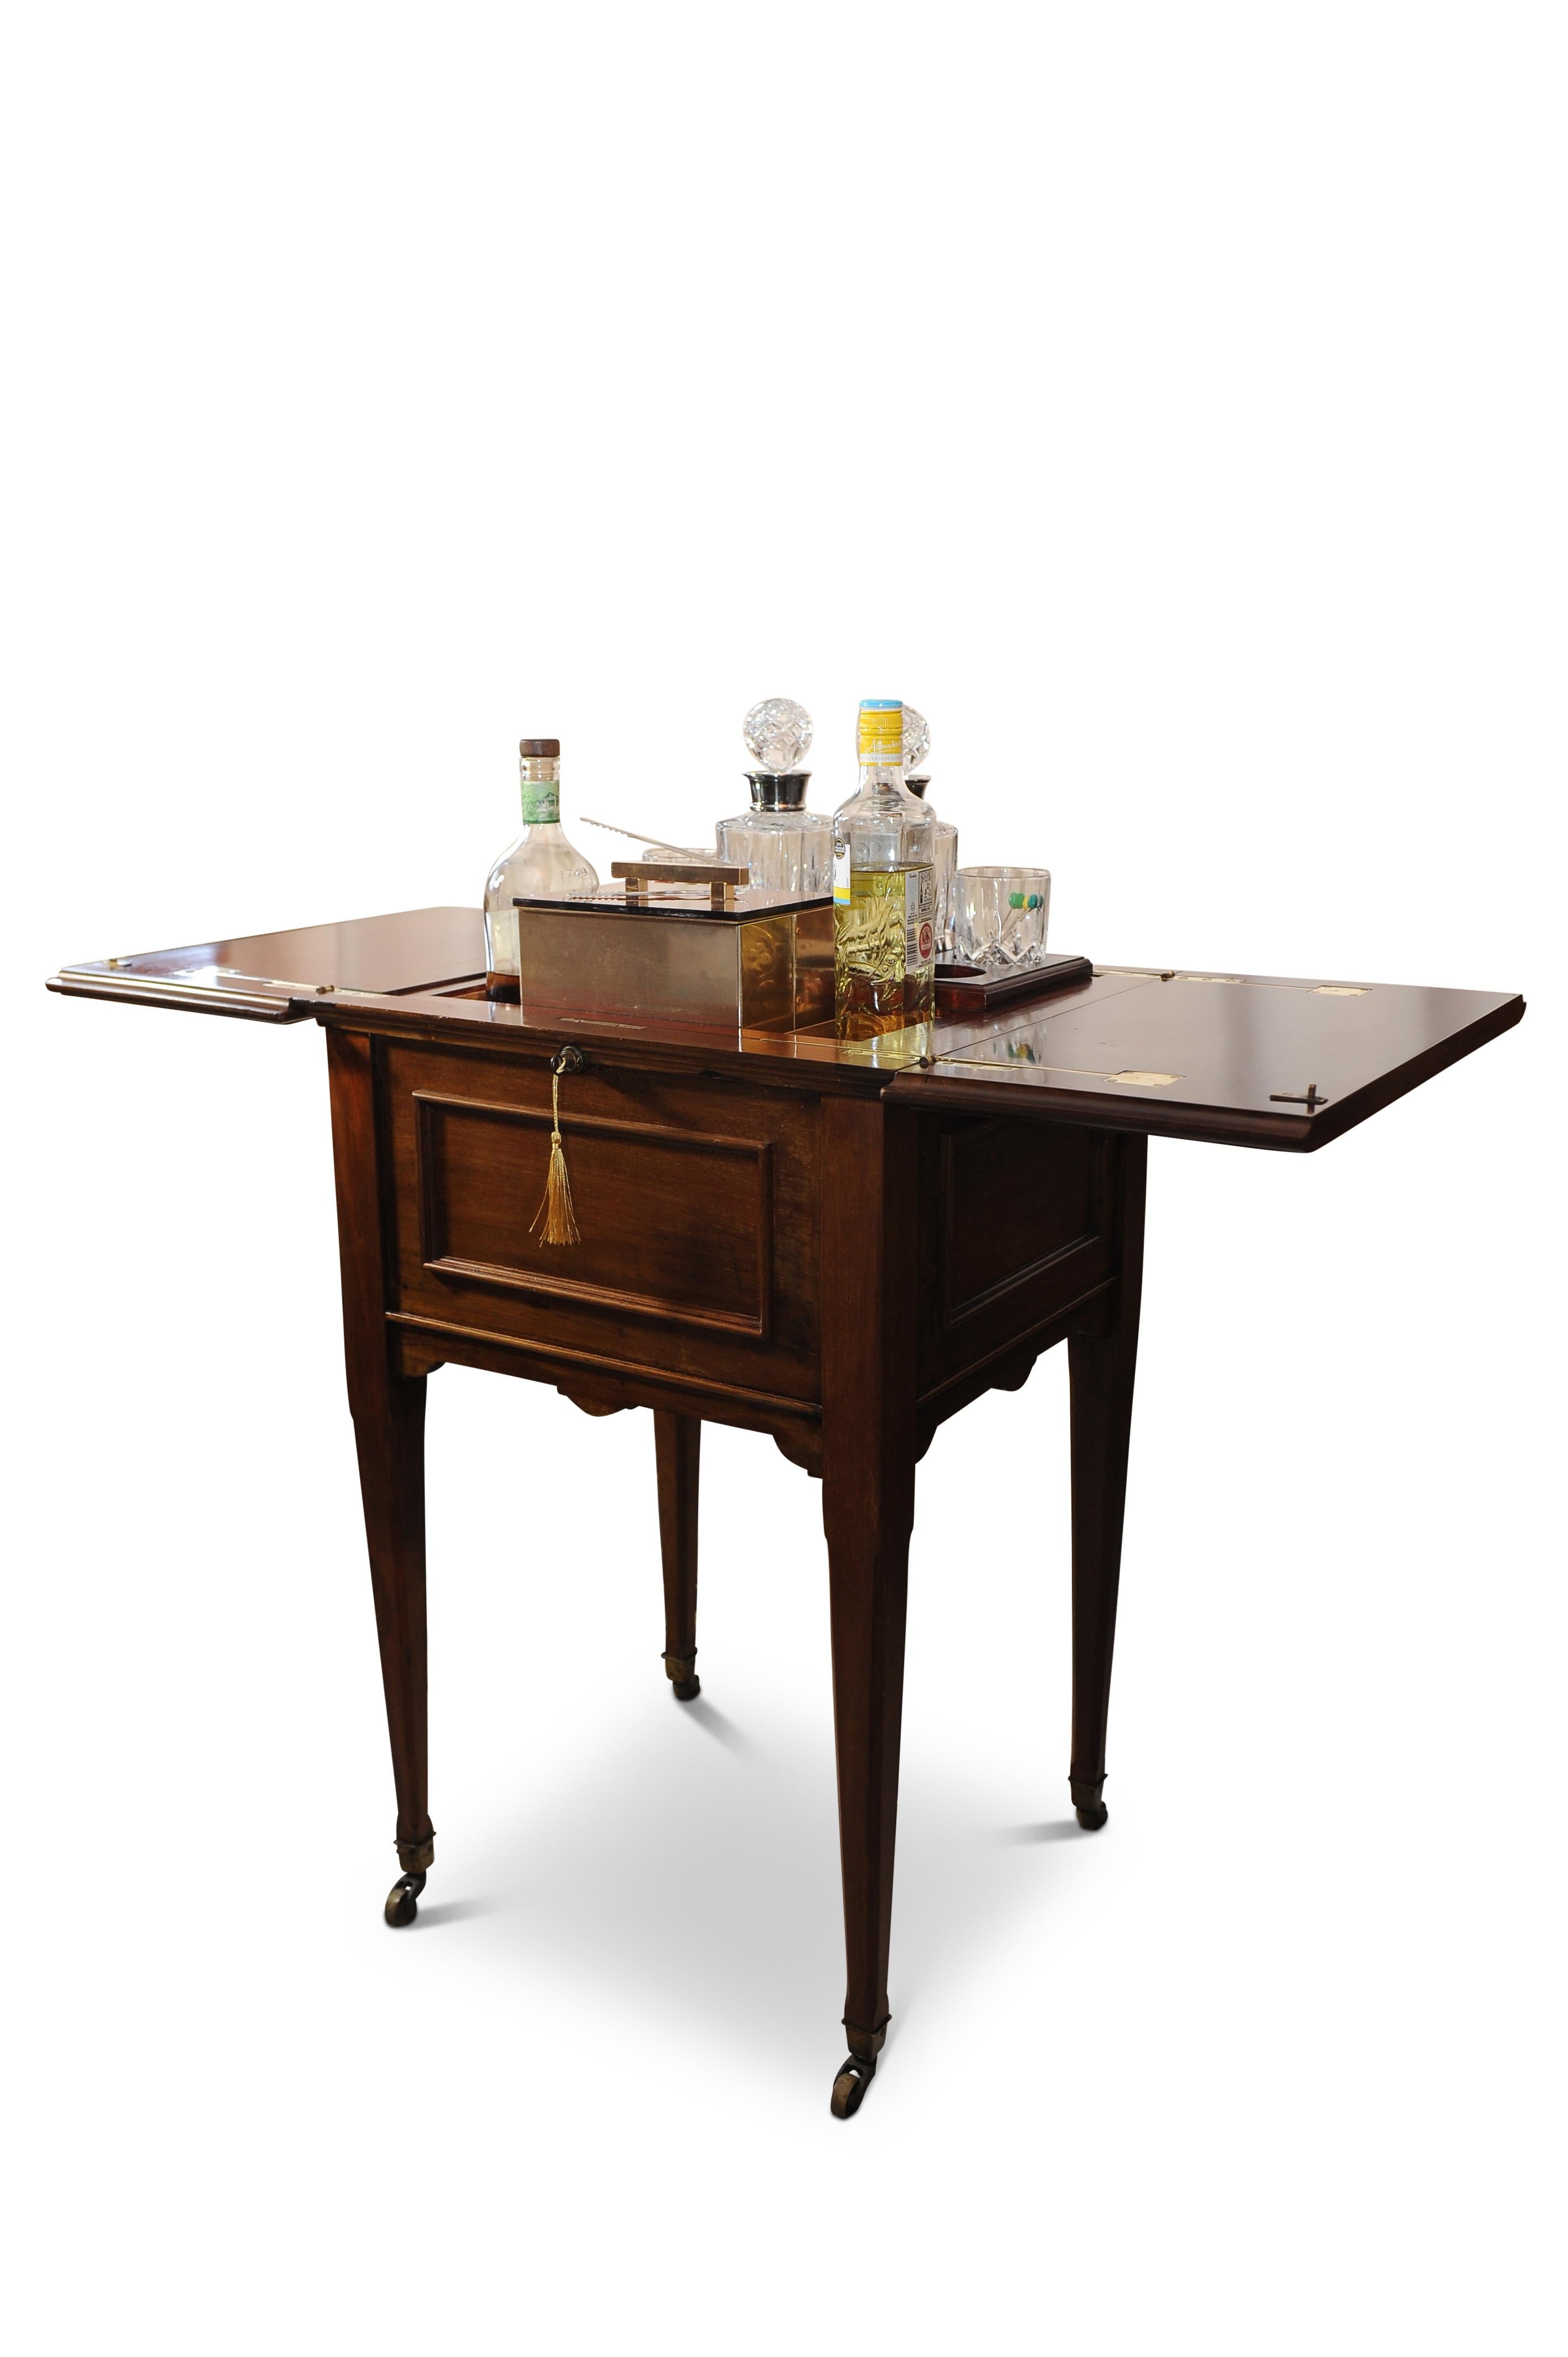 English Luxurious London Made 1920s Pop Up Dry Bar Drinks Cabinet and Decanters For Sale